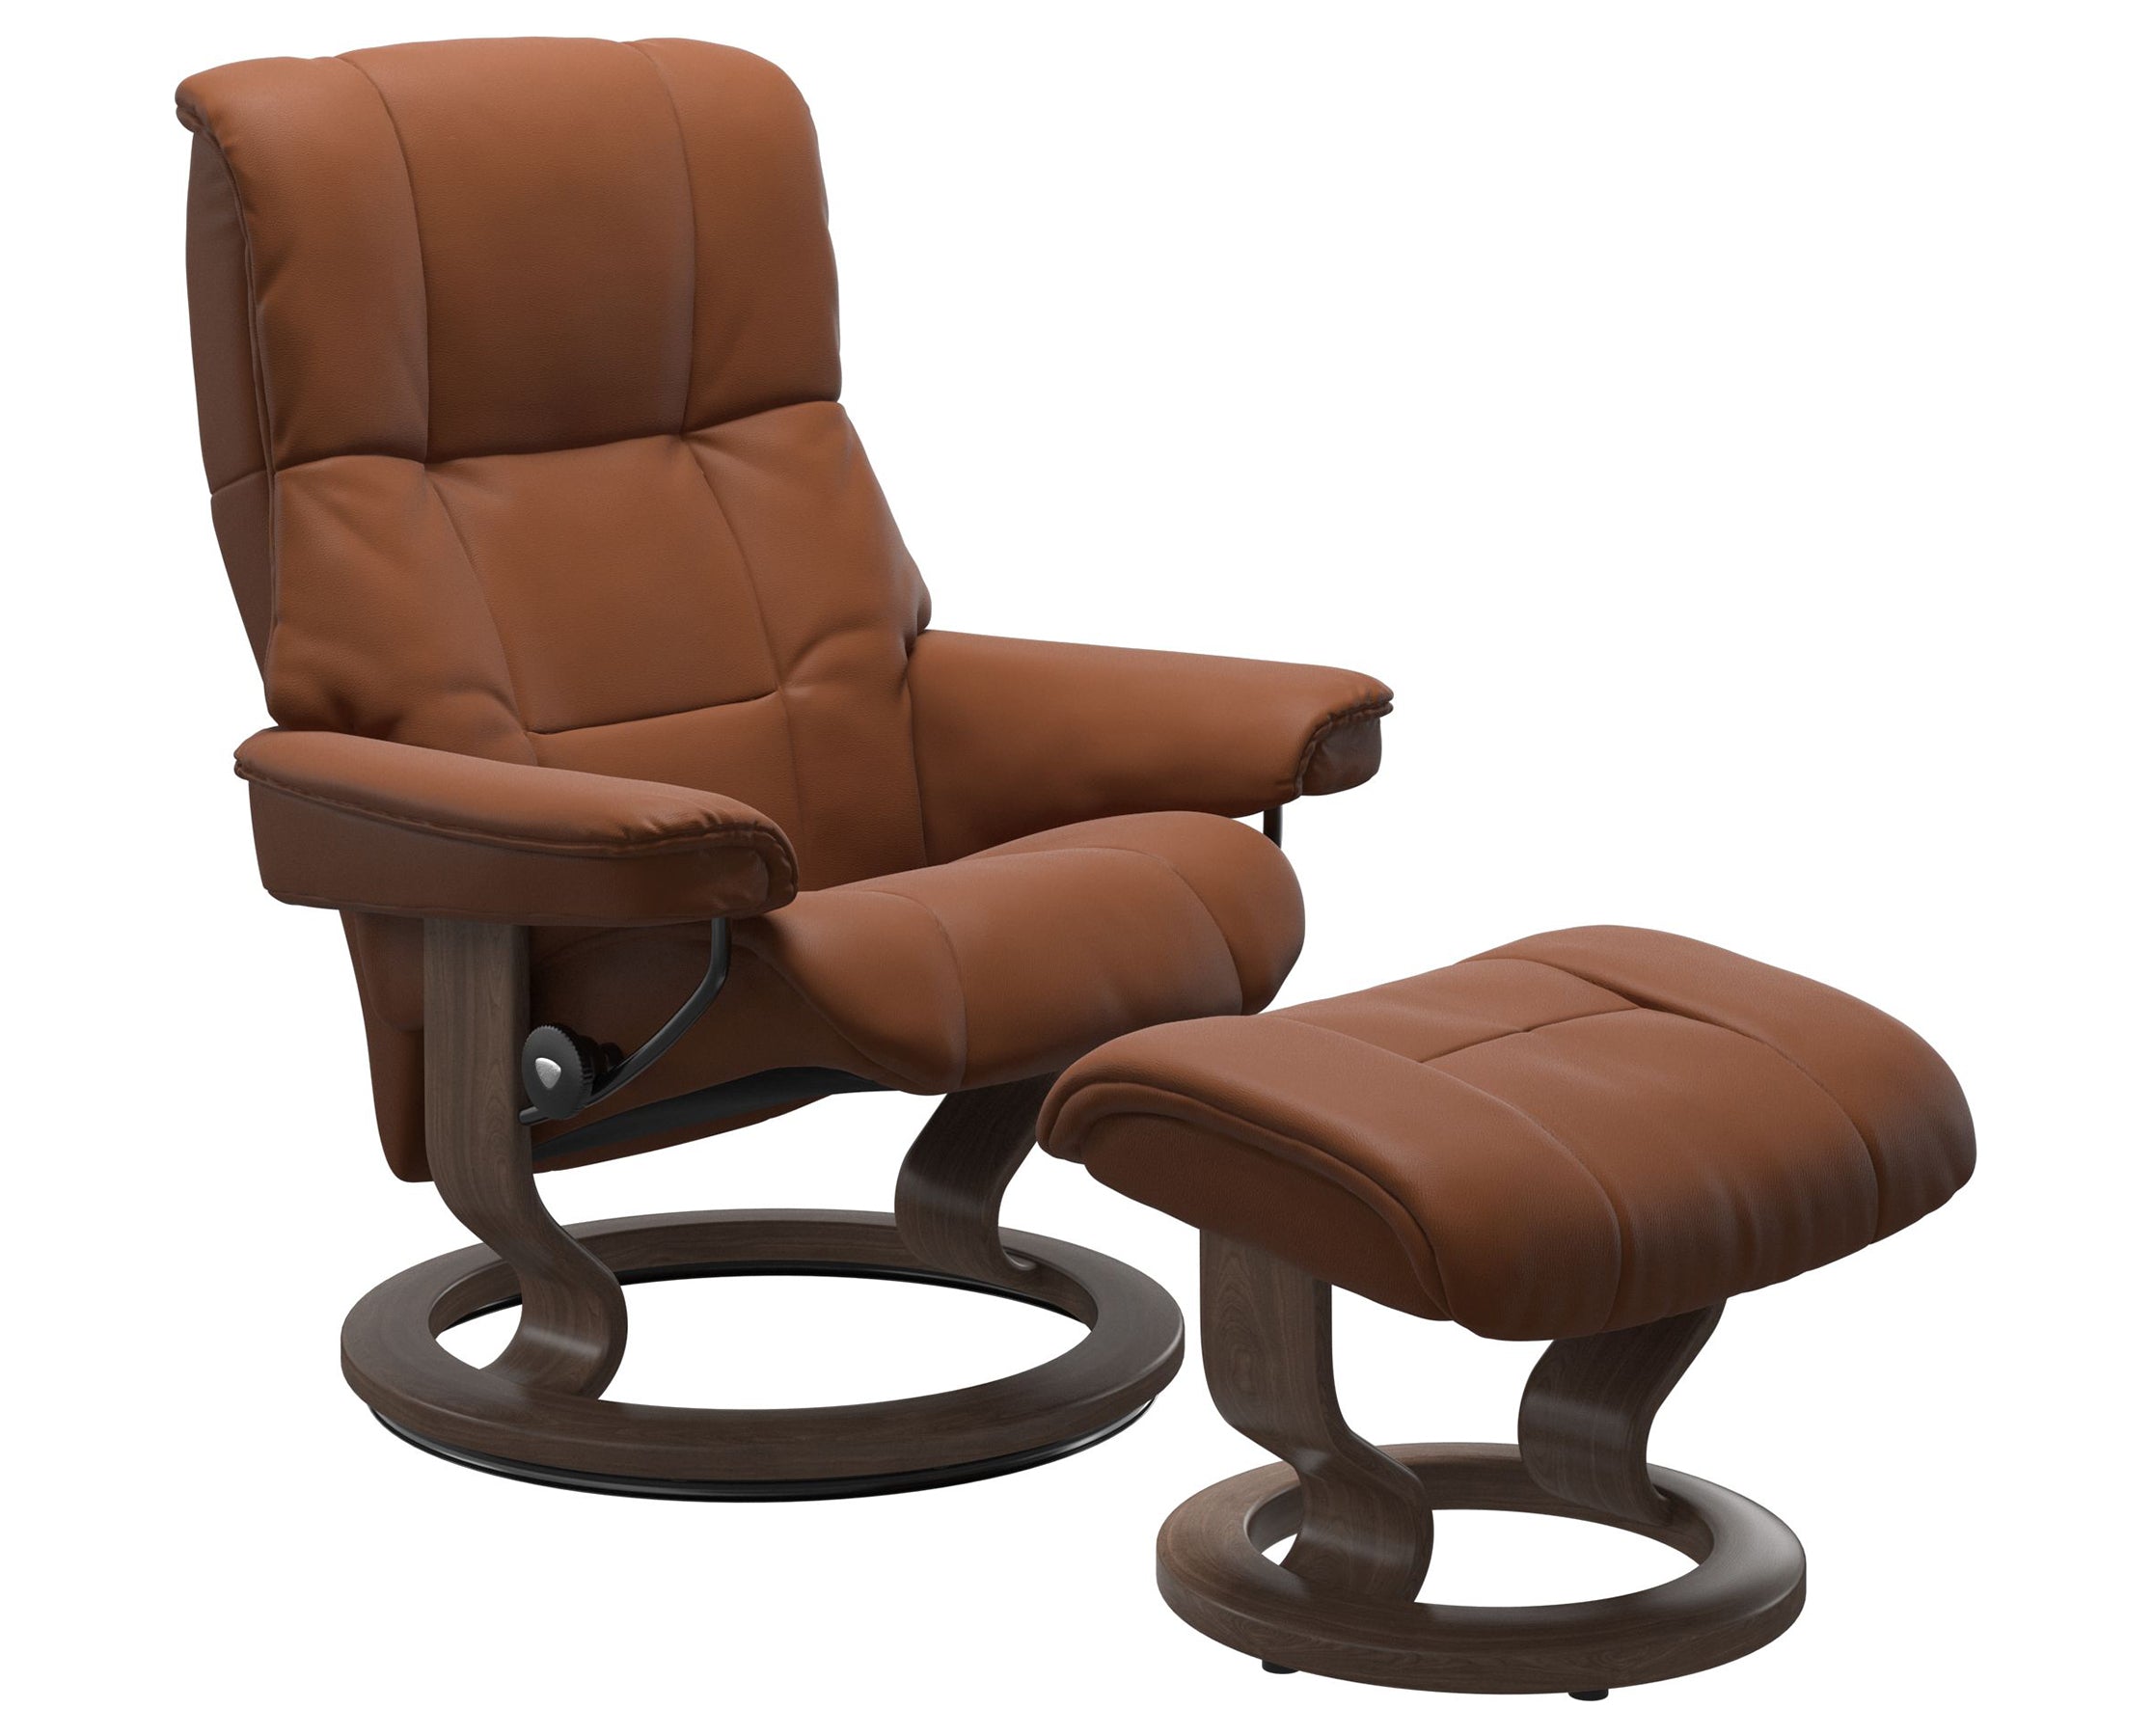 Paloma Leather New Cognac S/M/L and Walnut Base | Stressless Mayfair Classic Recliner | Valley Ridge Furniture